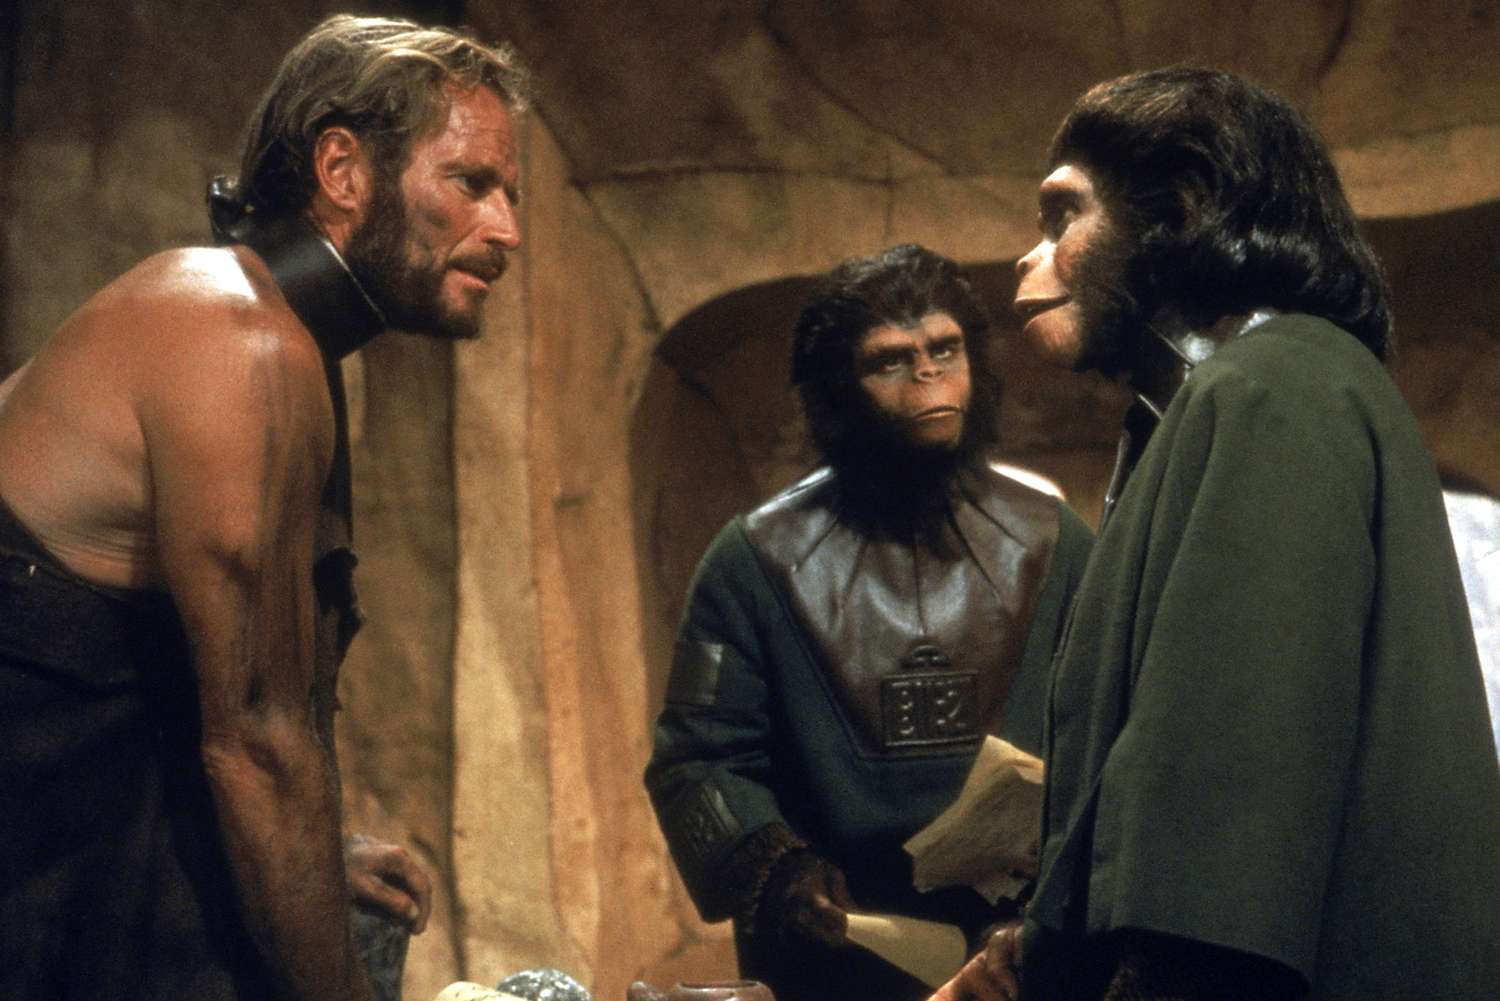 How to Watch All of the 'Planet of the Apes' Movies in Order